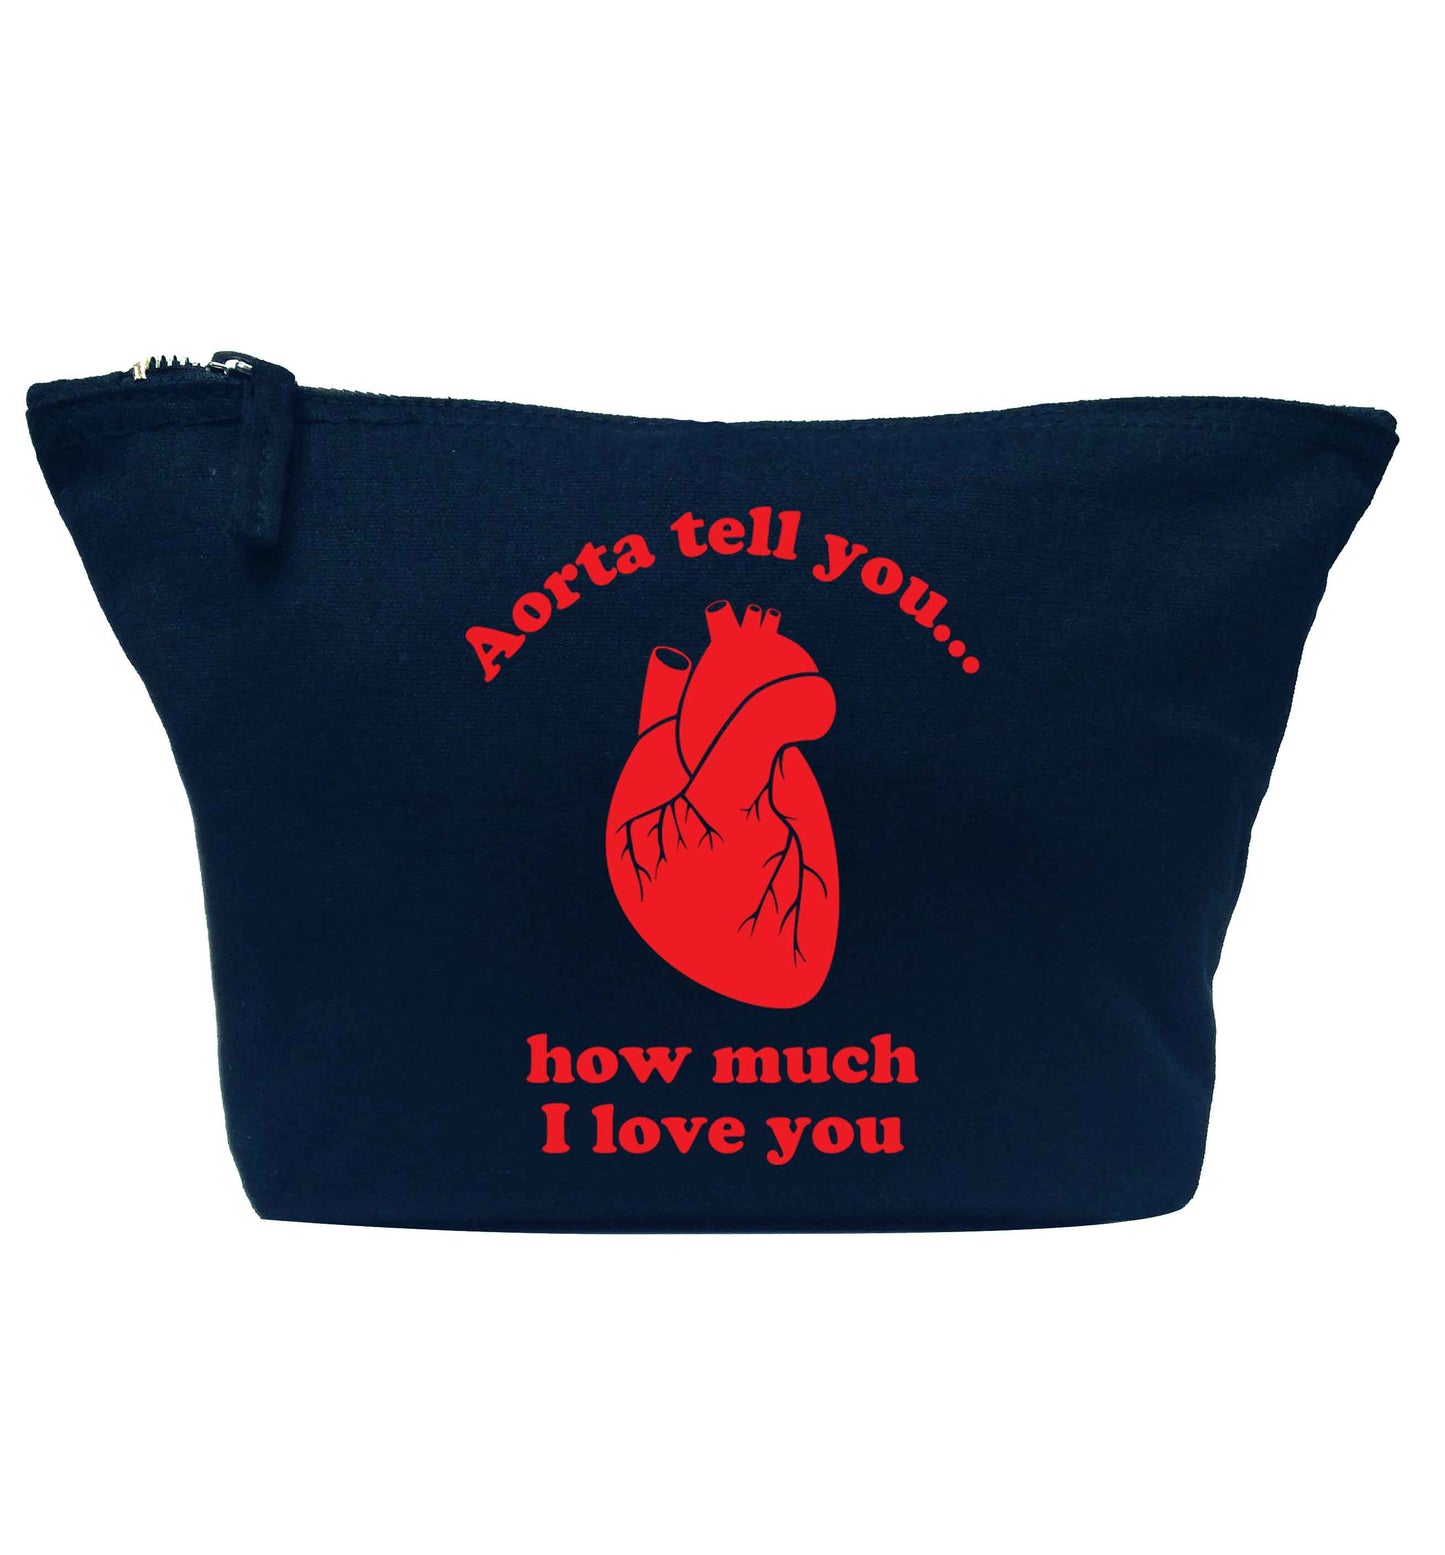 Aorta tell you how much I love you navy makeup bag